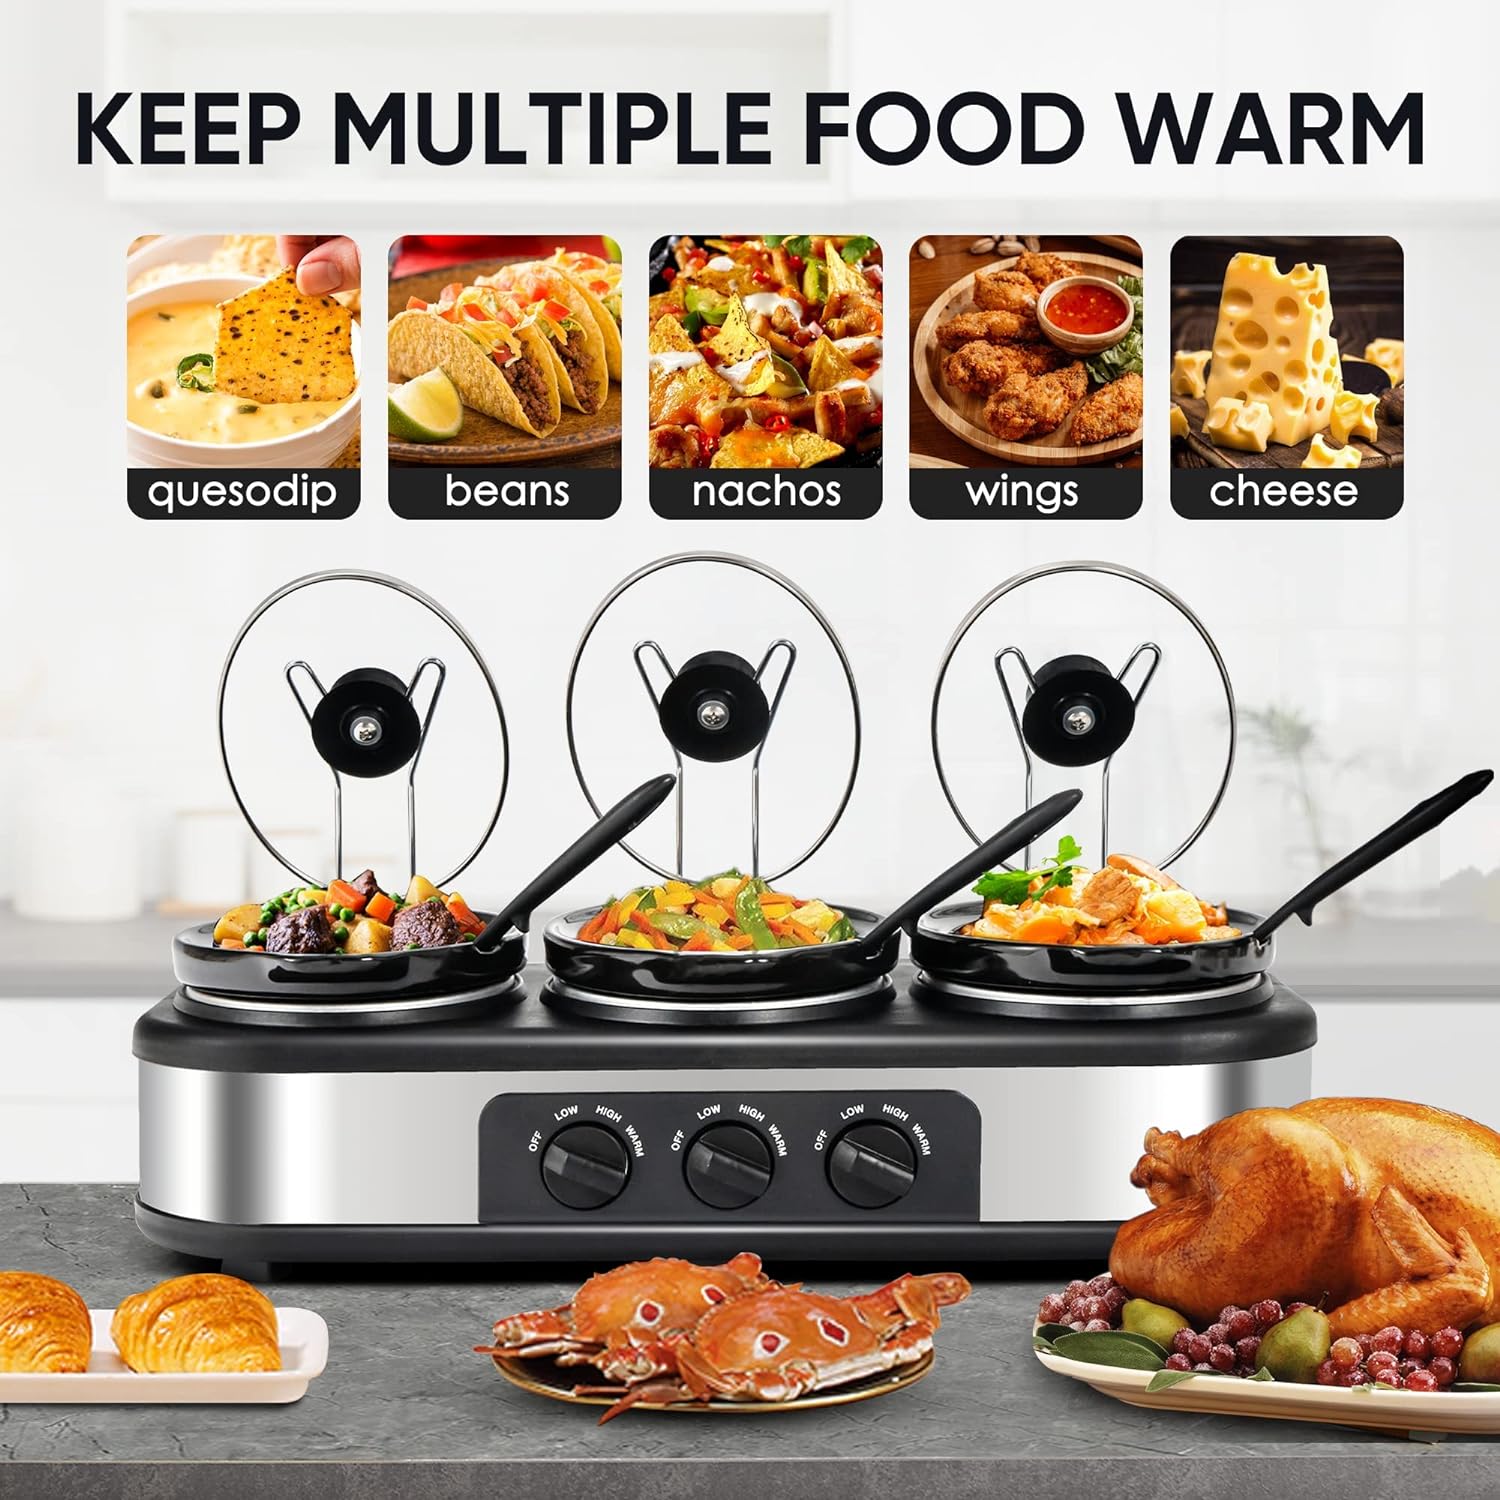 Triple Slow Cooker with Lid Rests, Breakfast Buffet Servers and Warmers with 3 X 1.5Qt, Tempered glass lids  3 Adjustable Temp, Dishwasher Safe, Stainless Steel